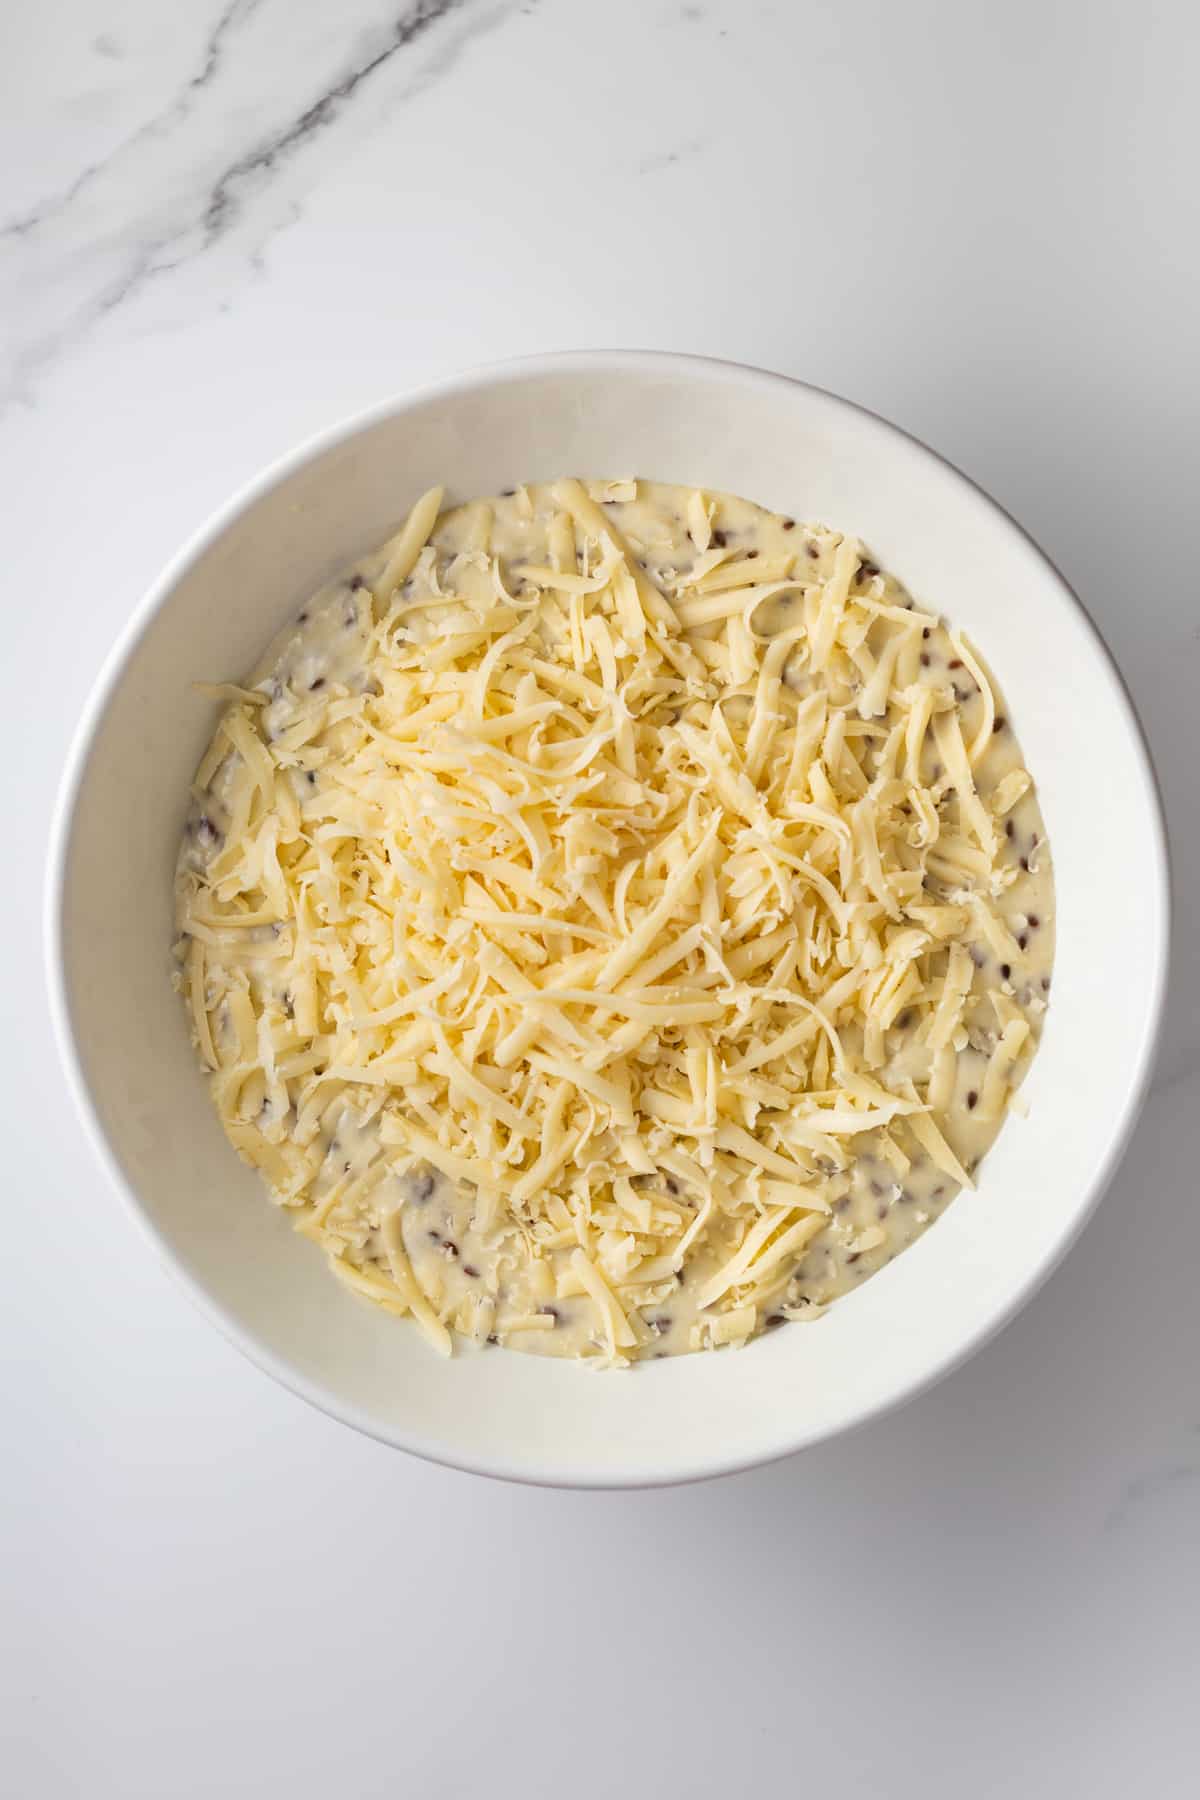 Cake batter topped with grated cheese in a mixing bowl.